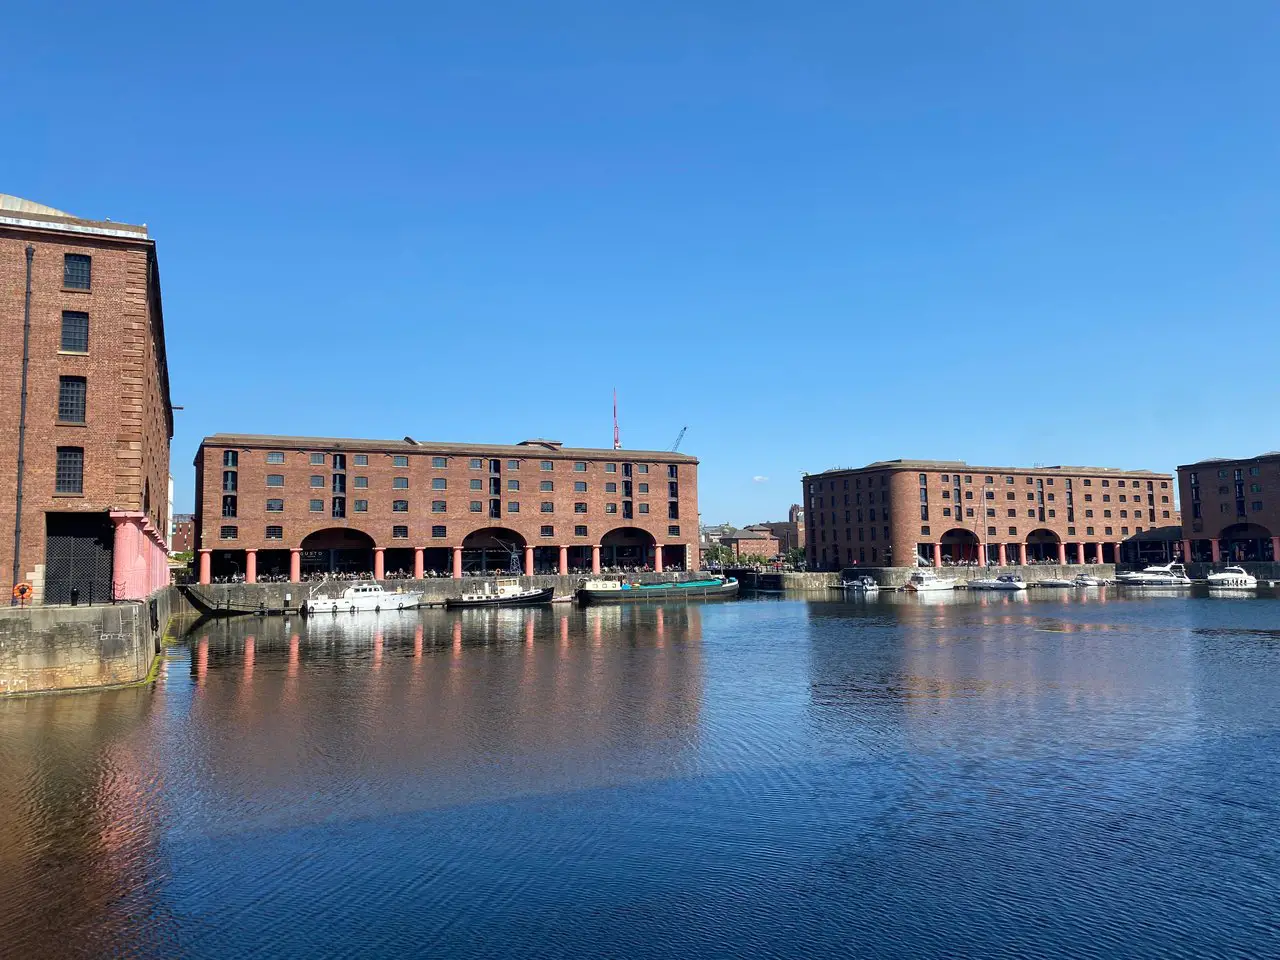 The redbrick buildings of the Albert Dock behind the water of the dock on a sunny day